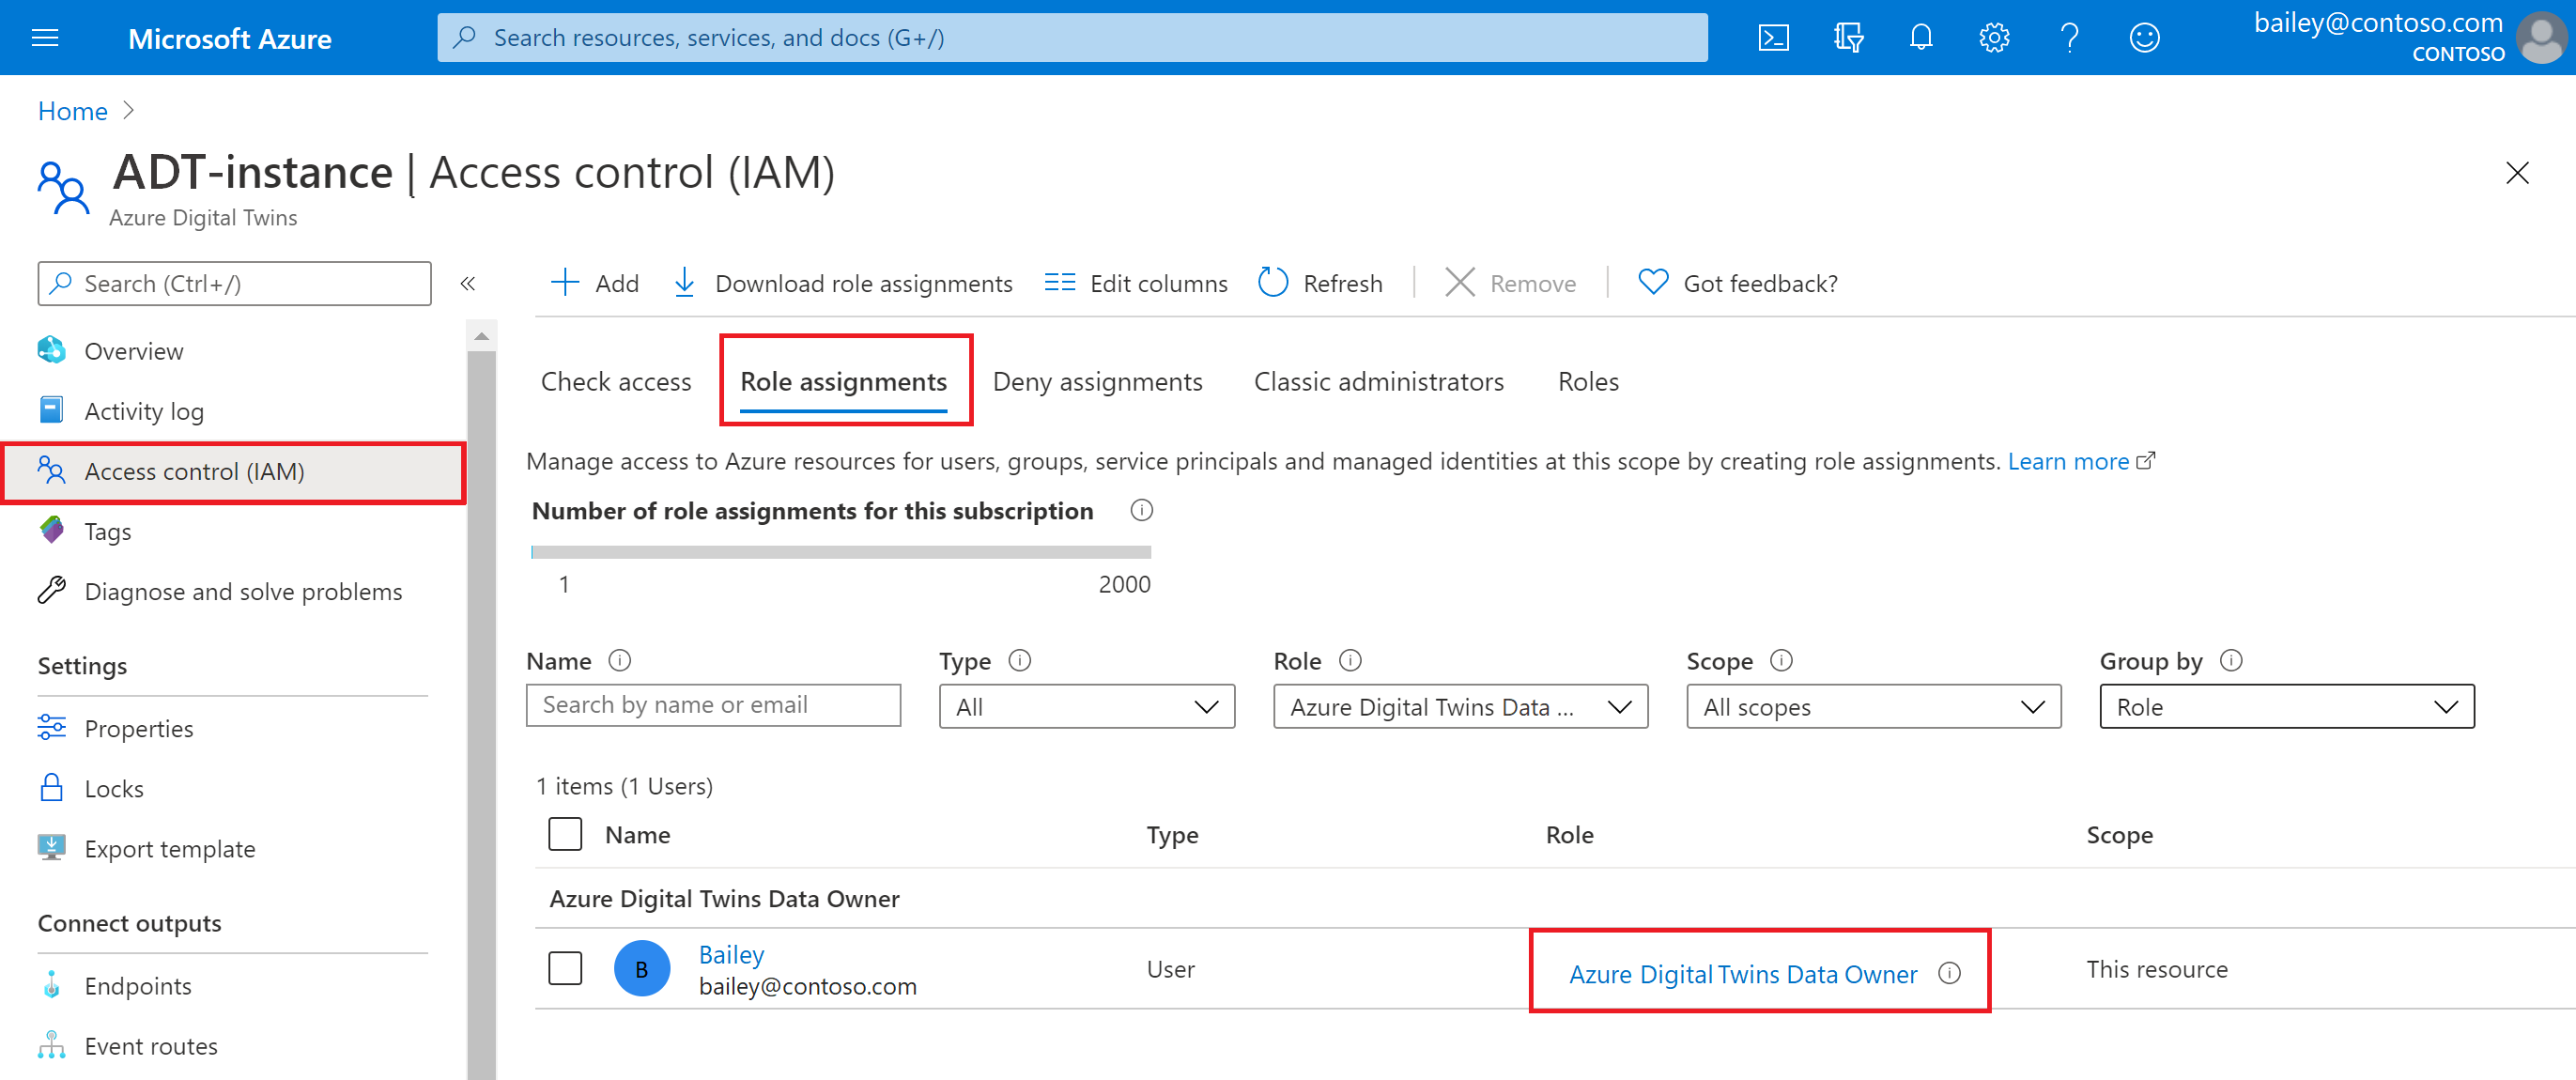 Screenshot of the role assignments for an Azure Digital Twins instance in the Azure portal.